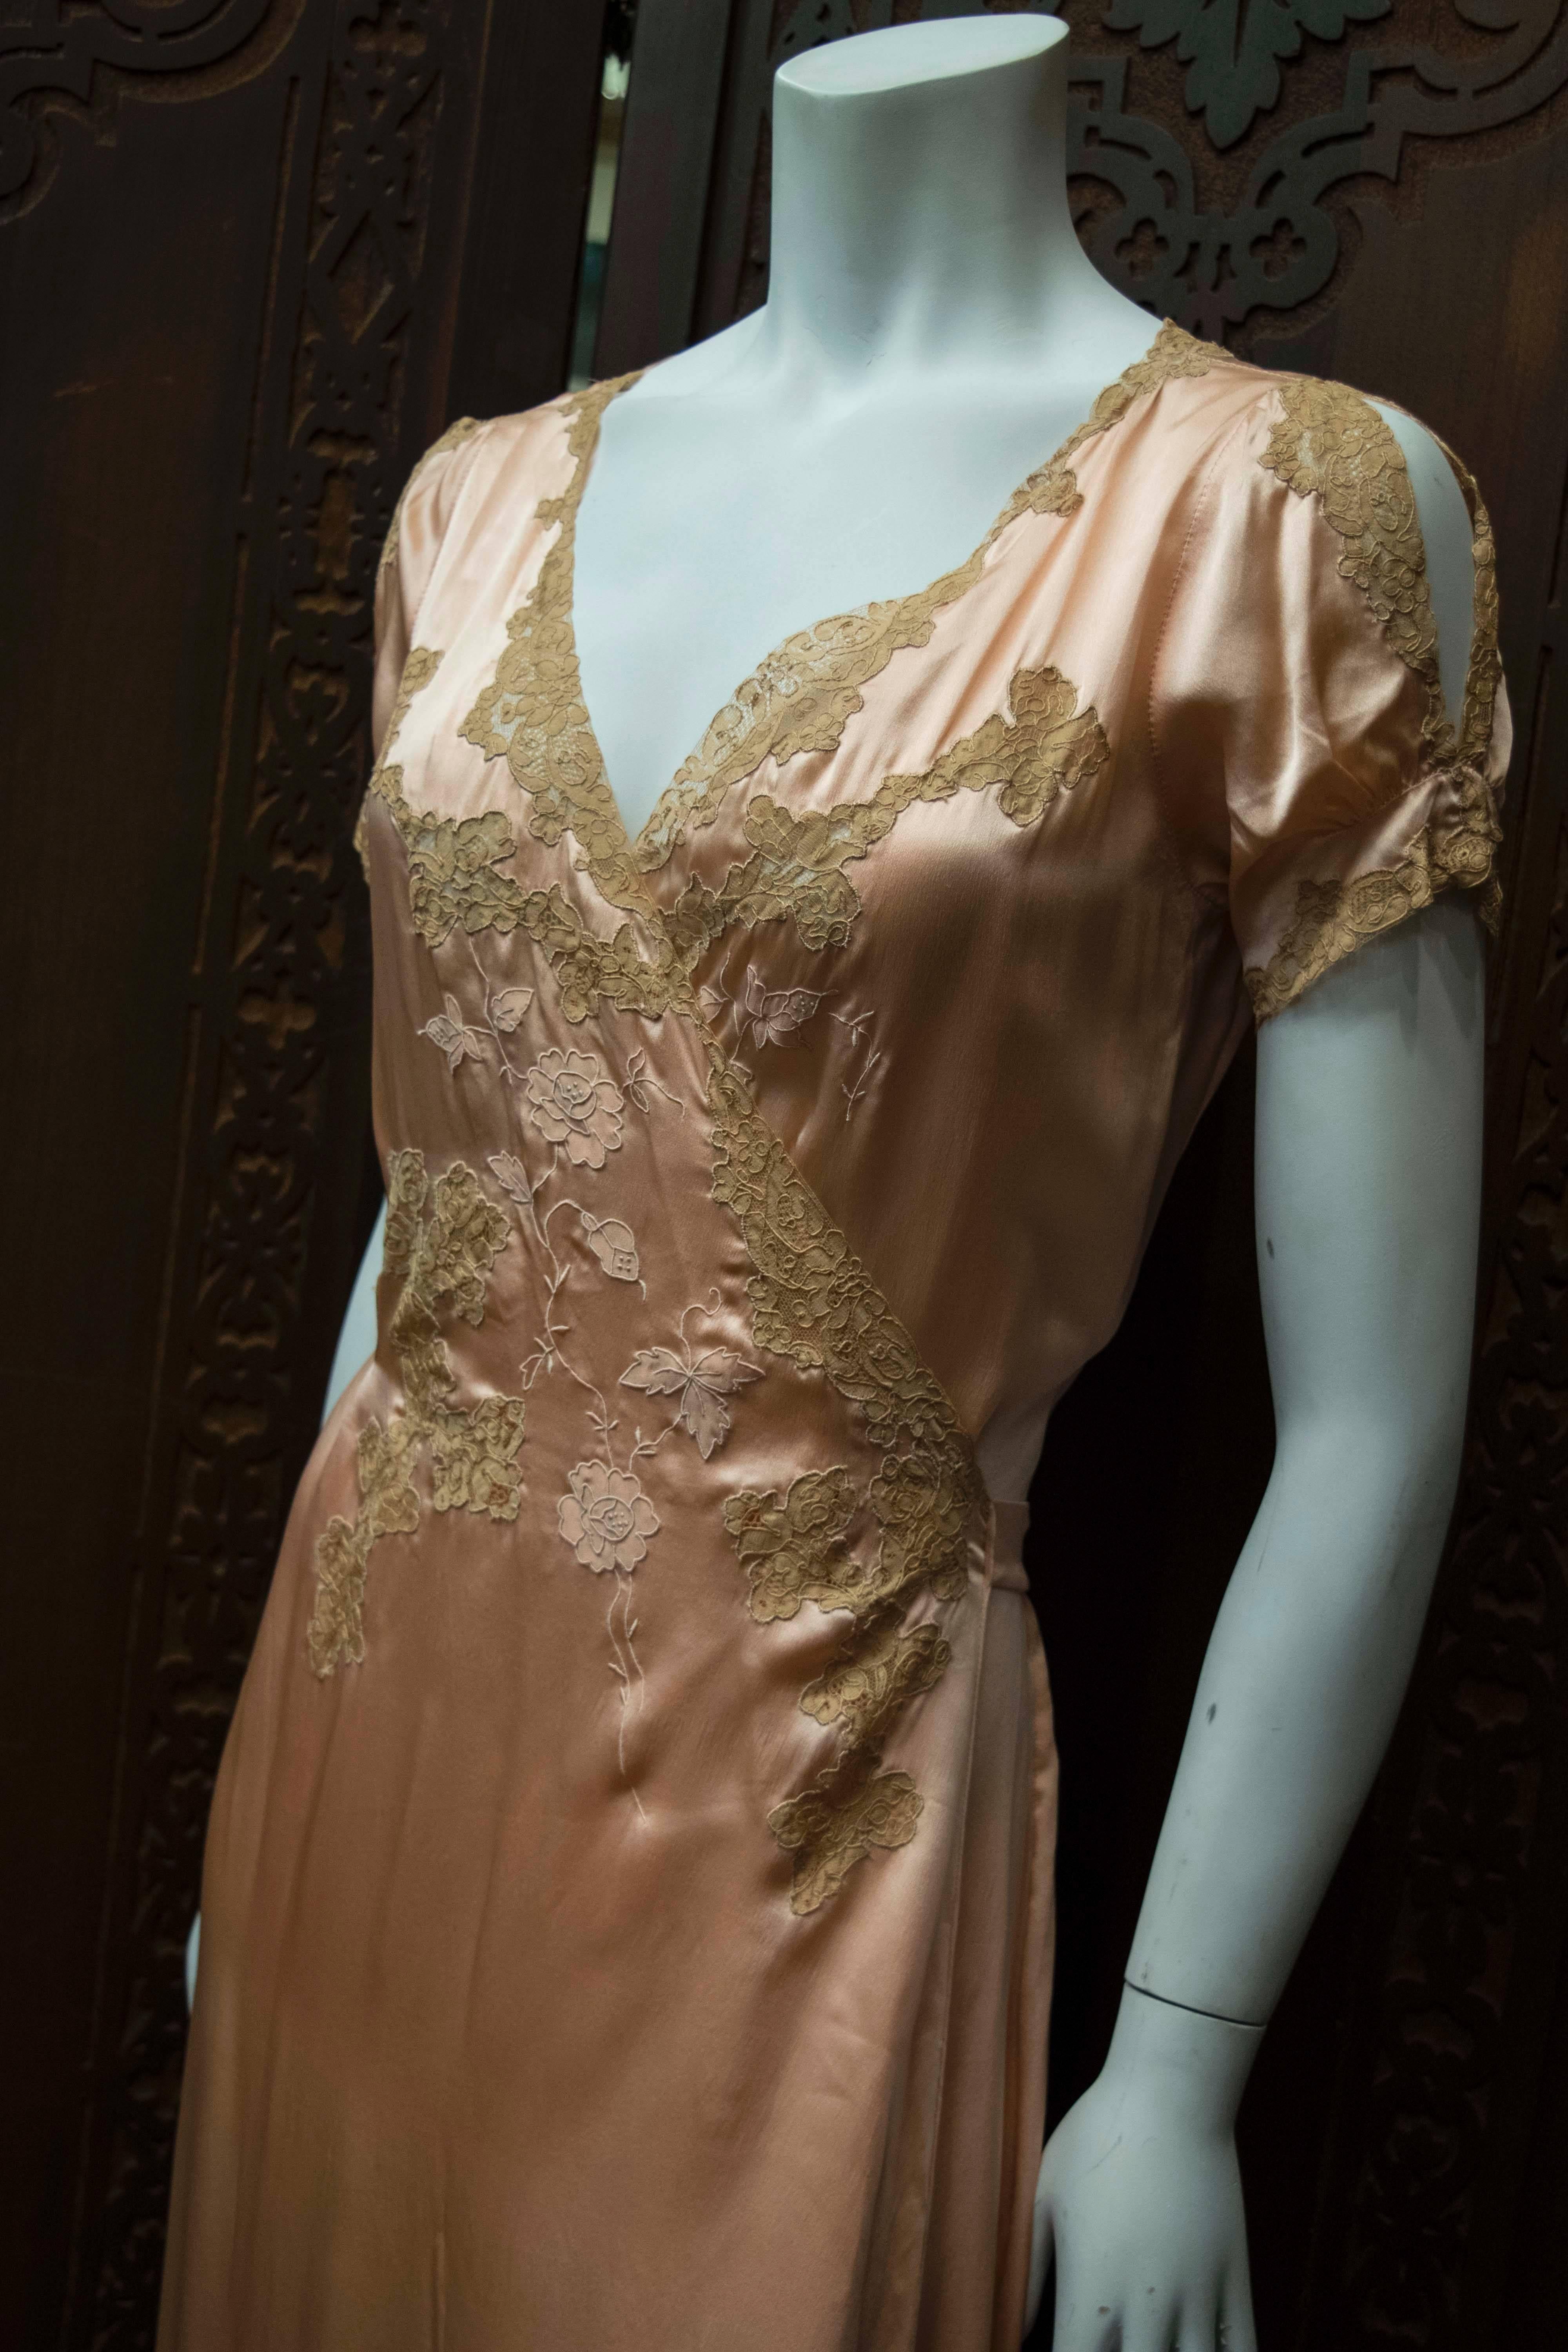 1930s Pink and Lace Wrapped Loungewear Gown

B 36
W 28
H 42
L 58